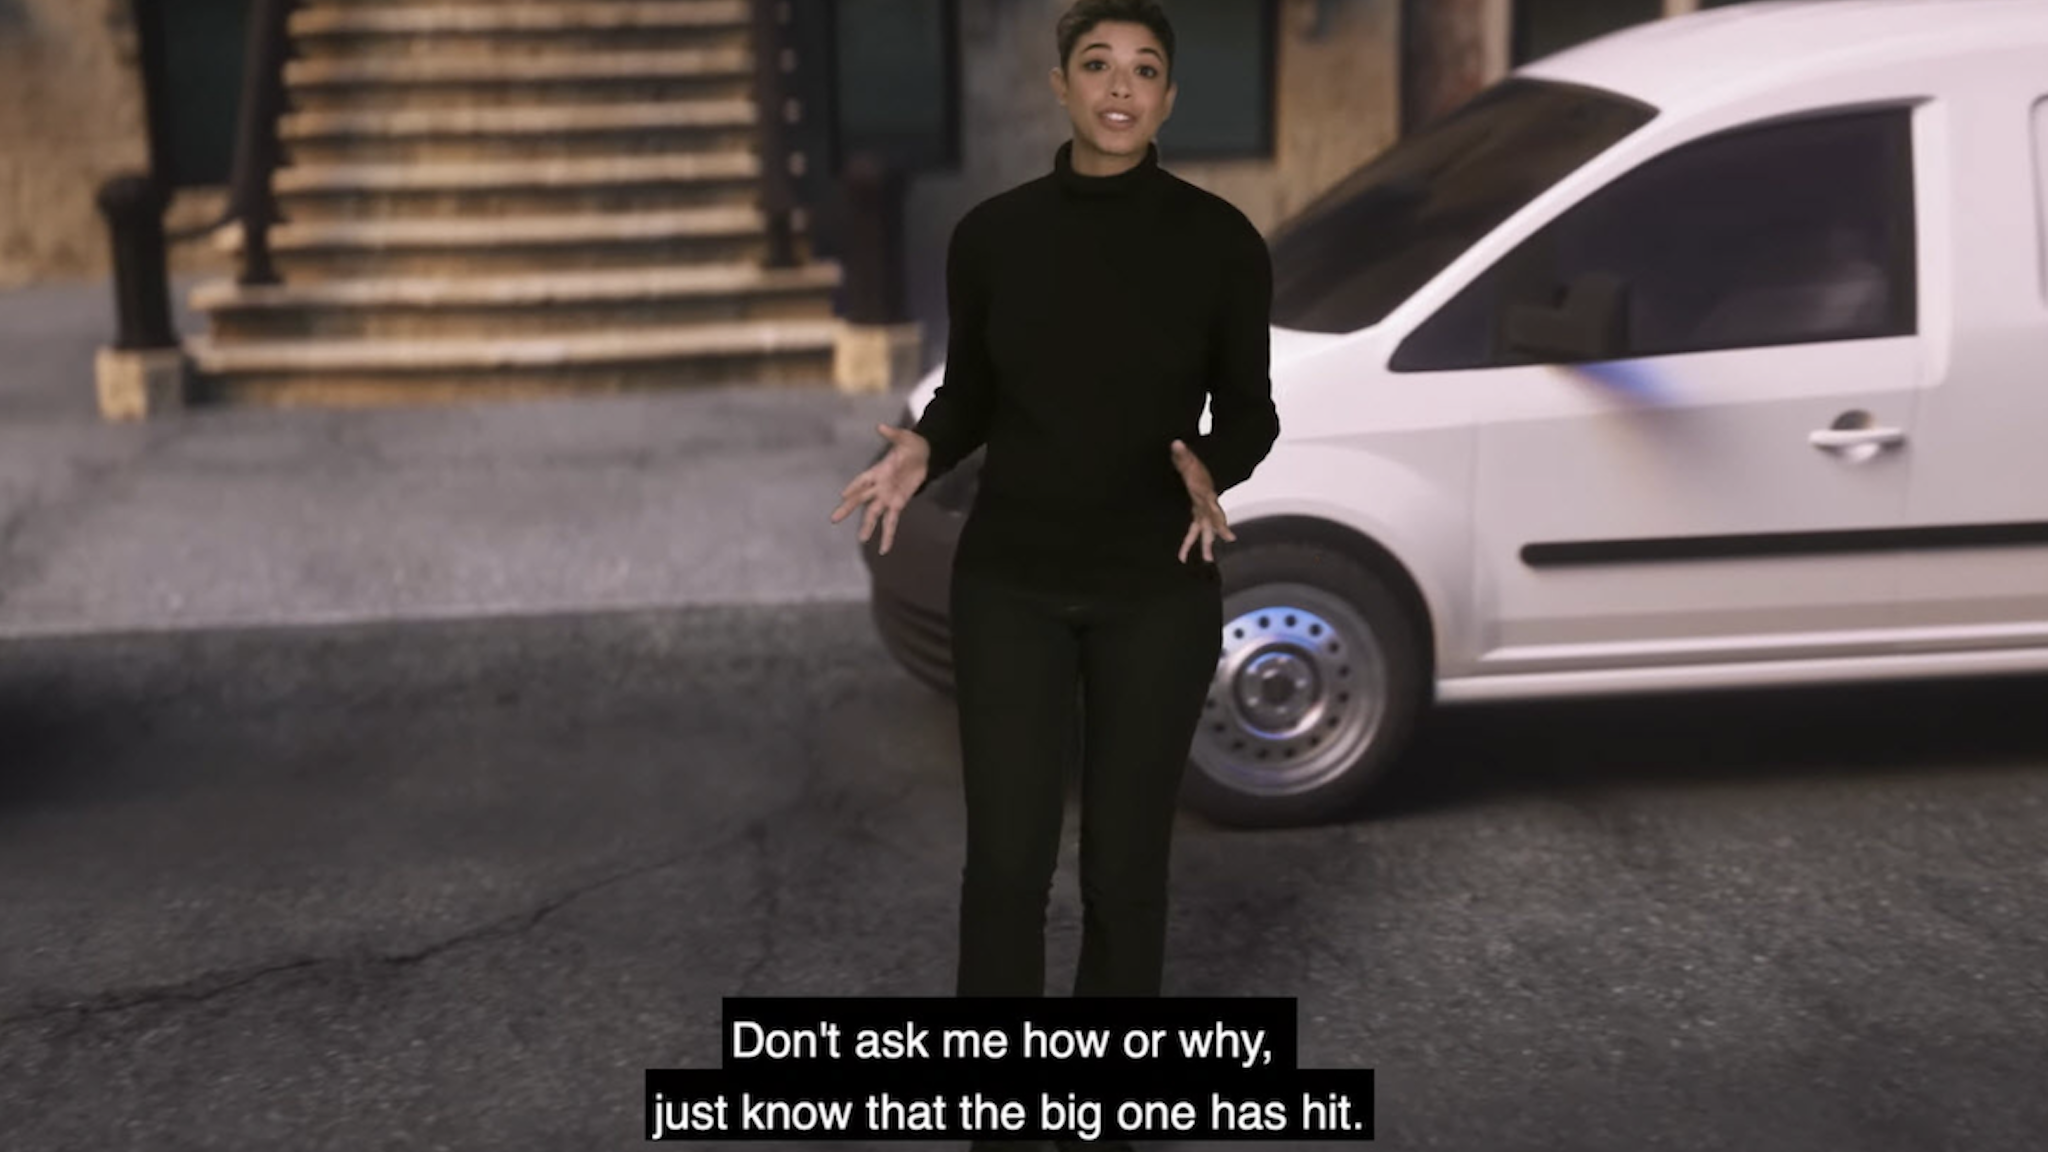 New York's latest PSA has viewers hoping they don't know something we don't.